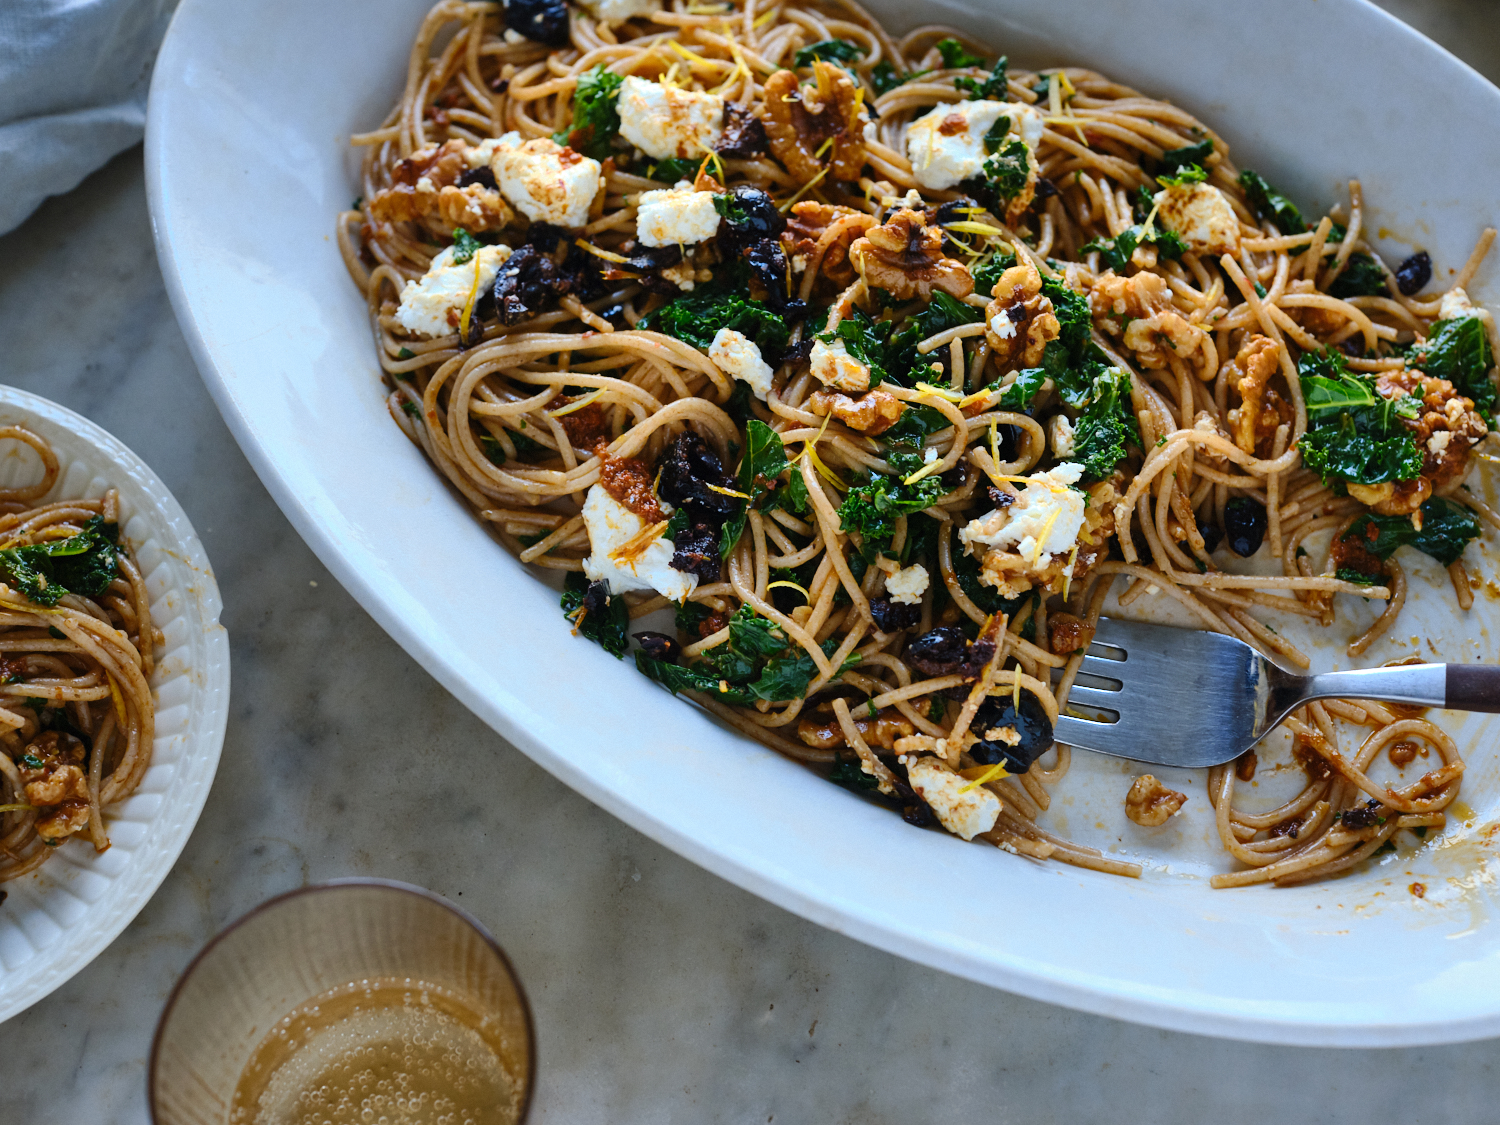 spaghetti tossed with harissa oil, kale, black olives and walnuts served on a platter